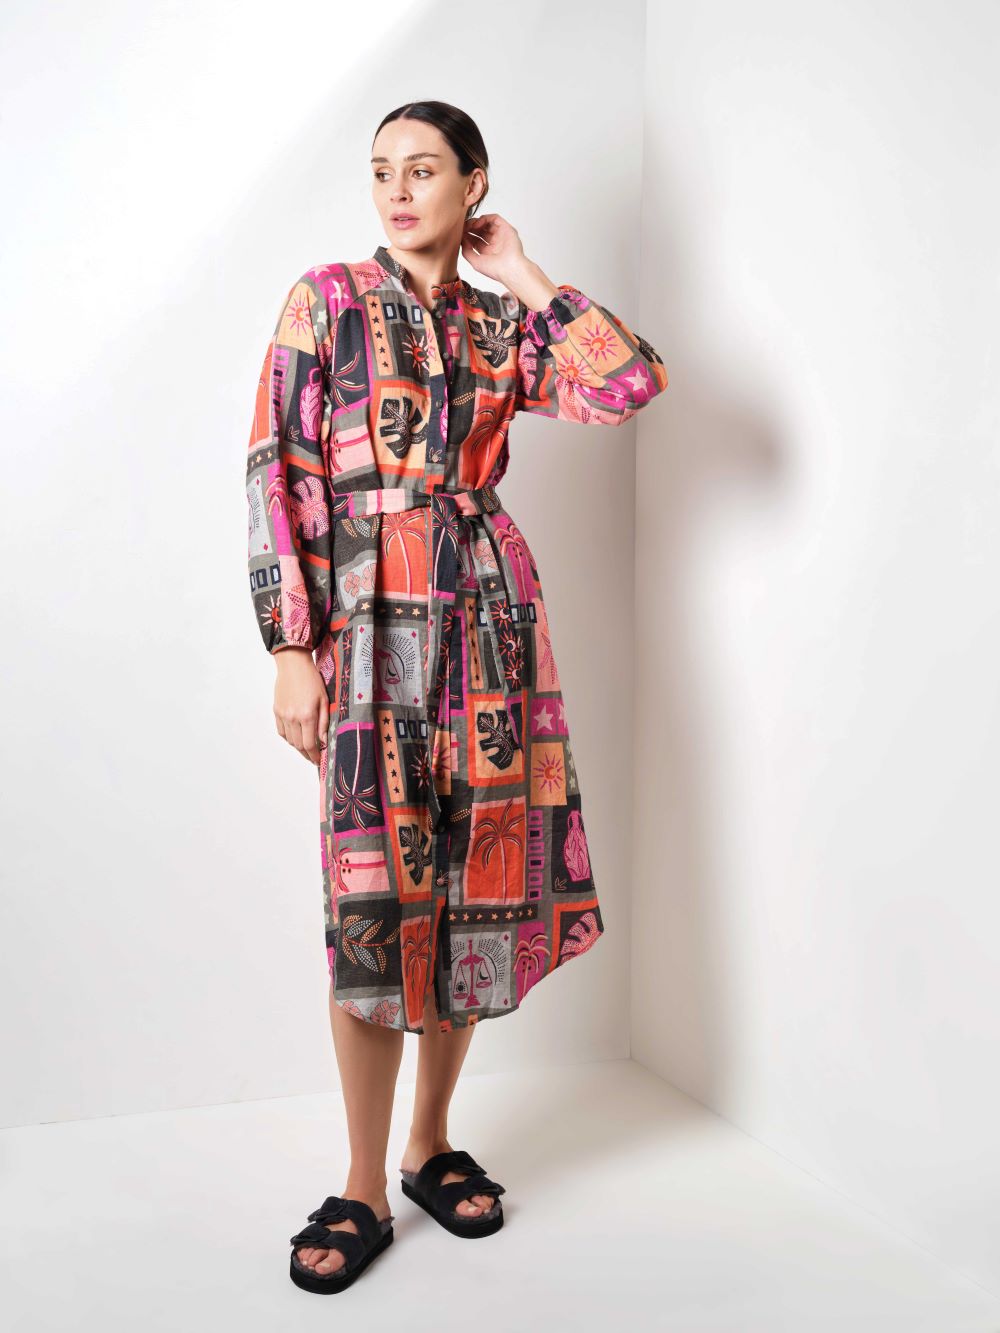 Parallel Culture Shoes and Fashion Online NEWYORKW24 WALNUT NEW YORK DRESS - TAROT